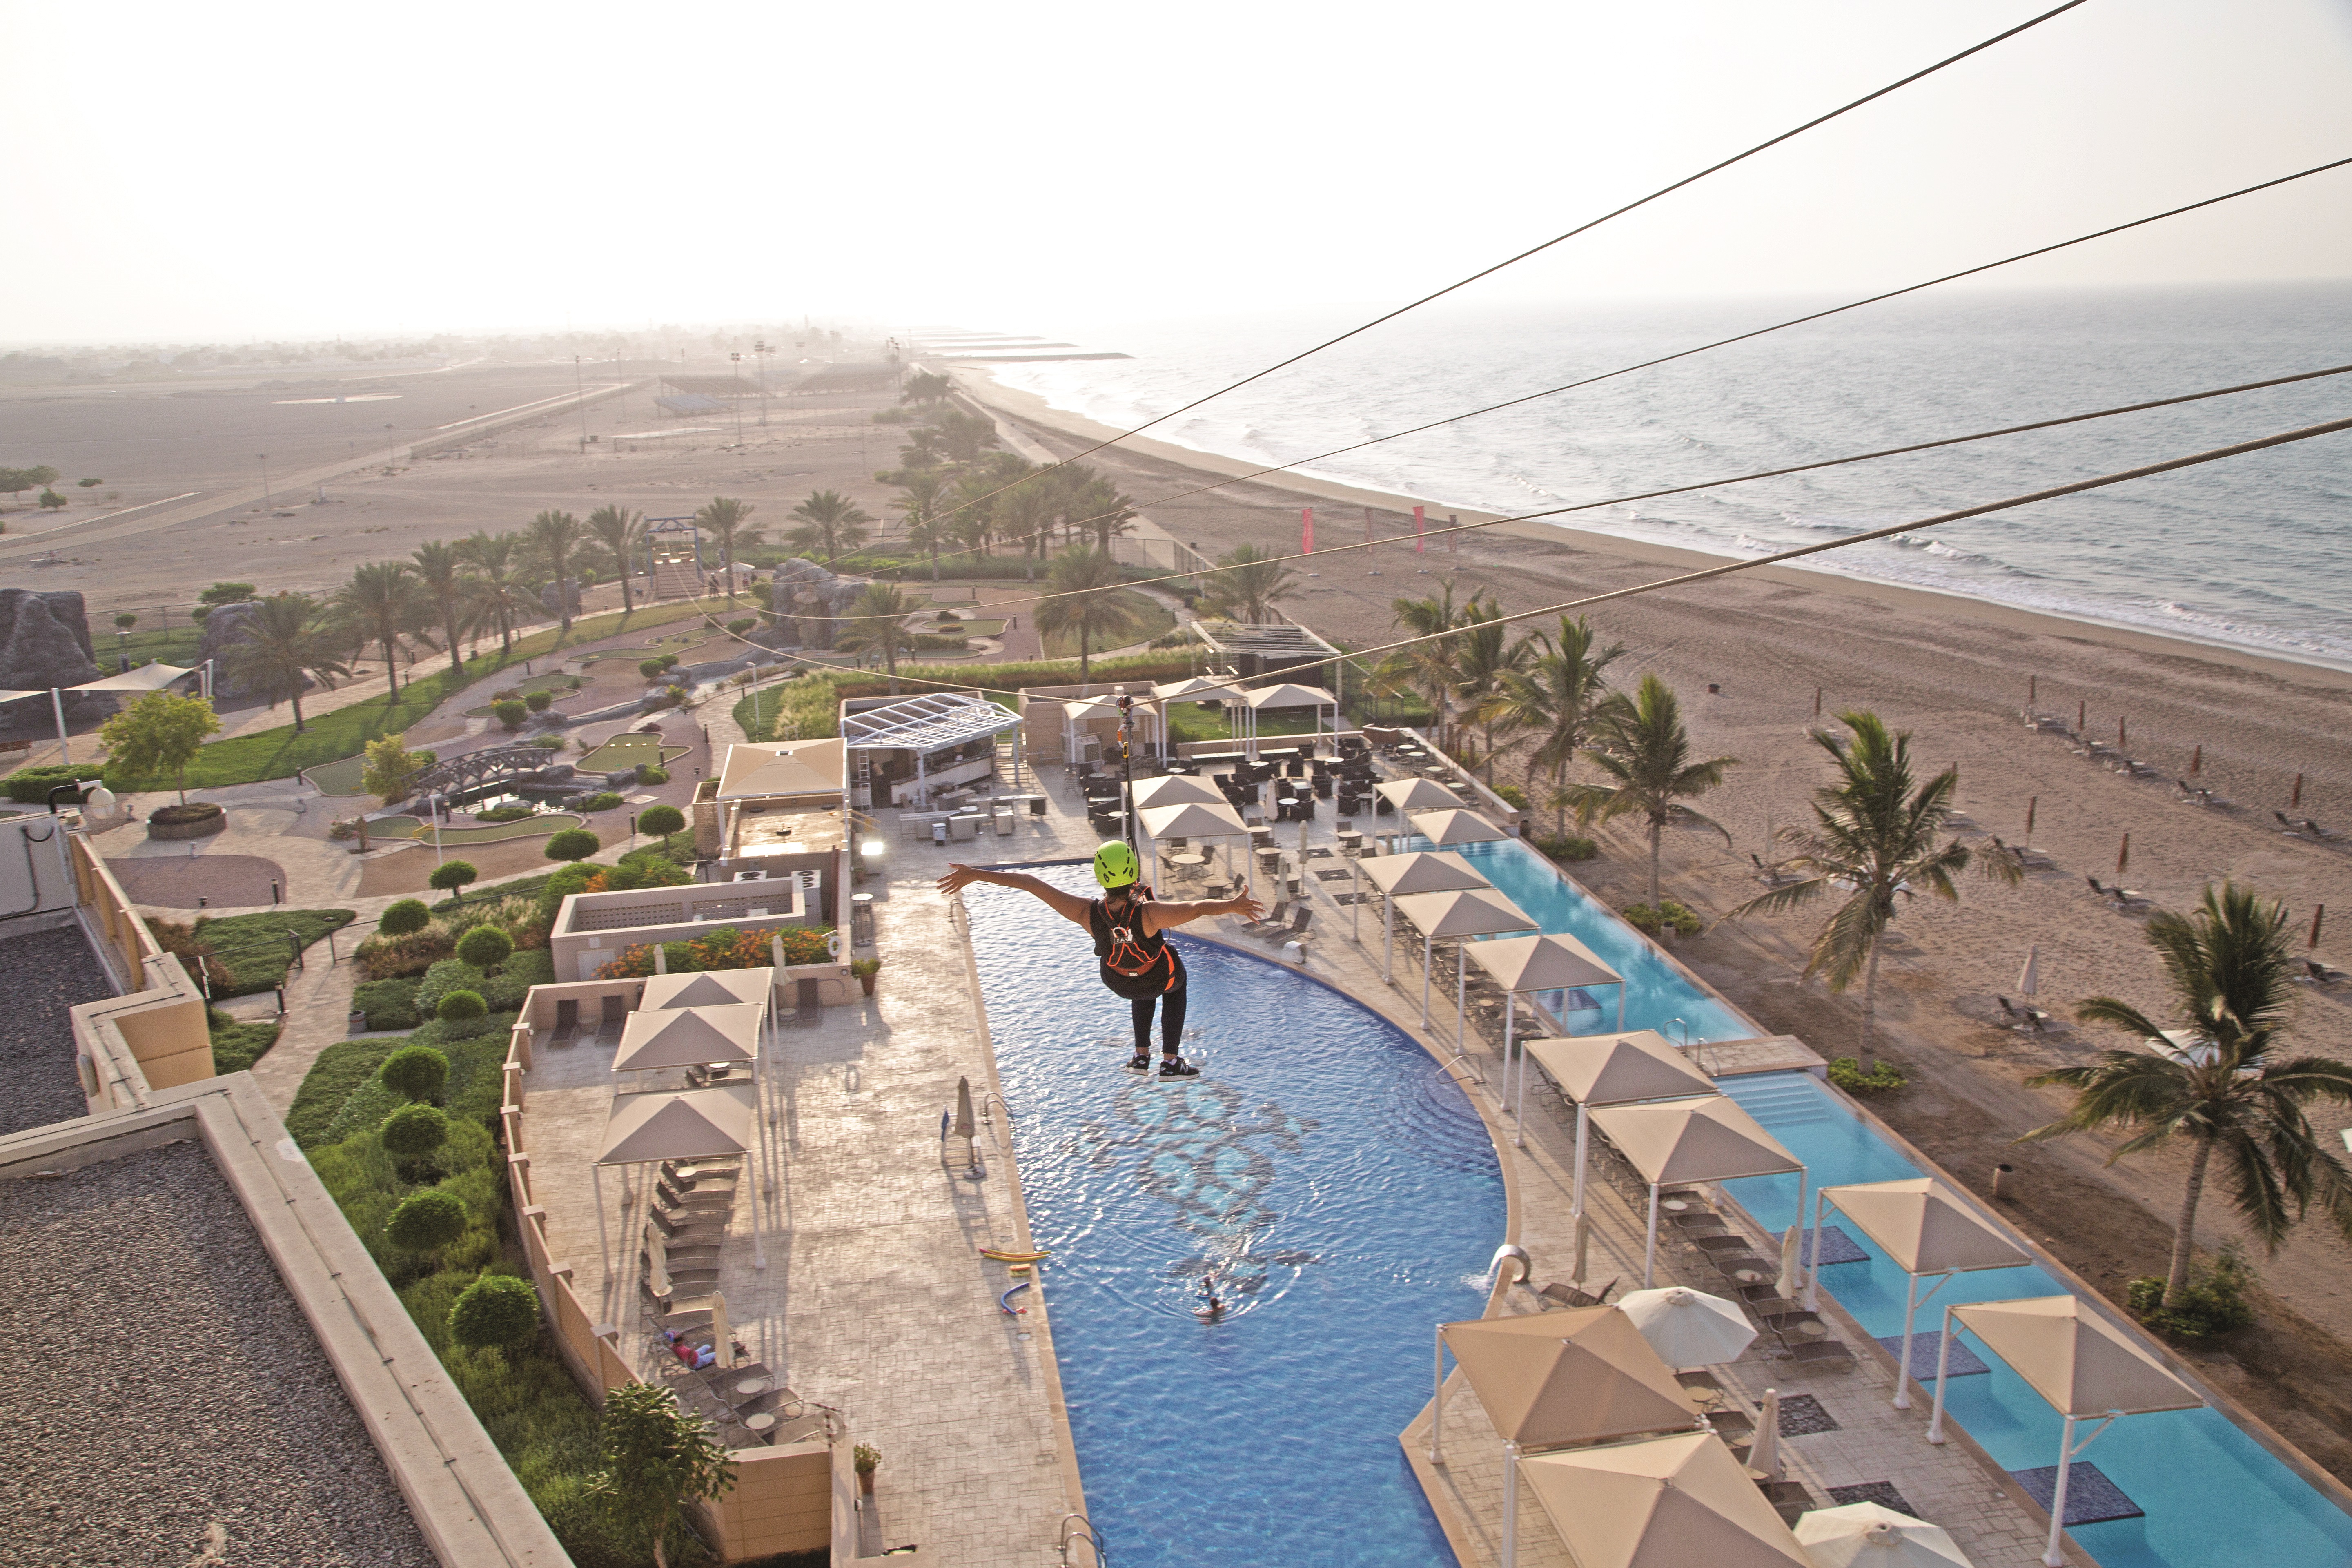 Try zip lining at Millennium Resort Mussanah in Oman